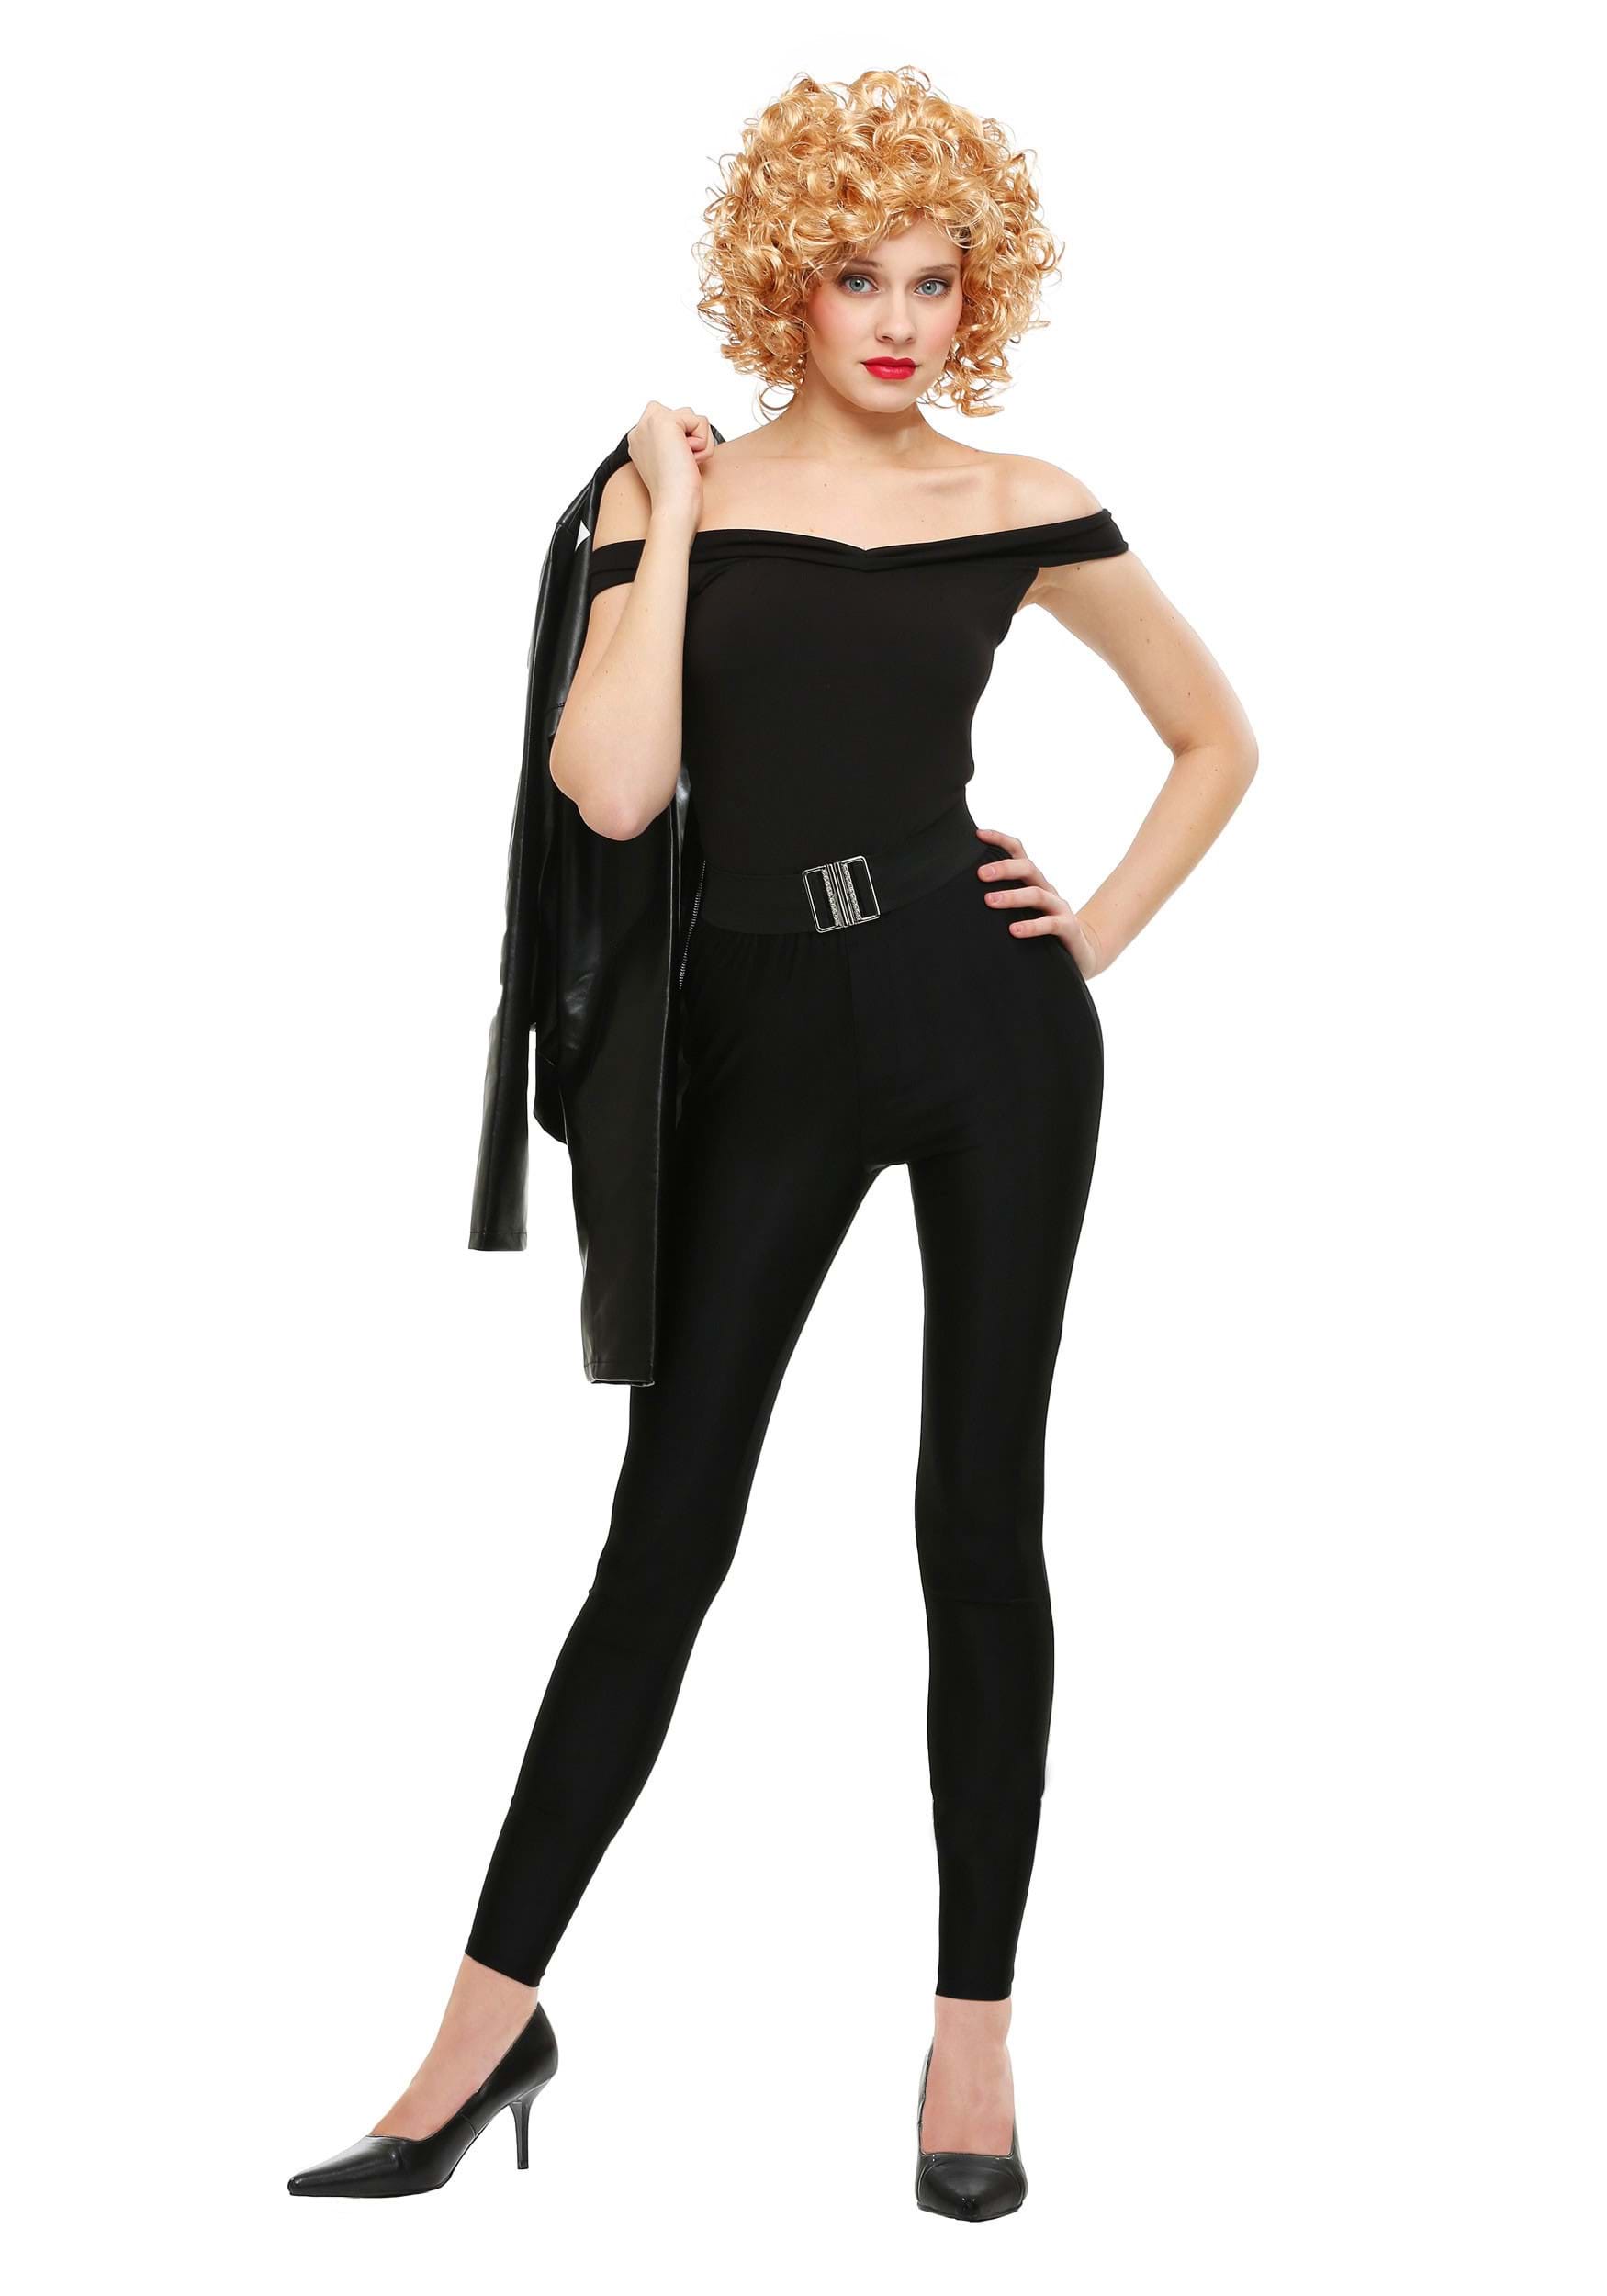 Grease Bad Sandy Costume for Women